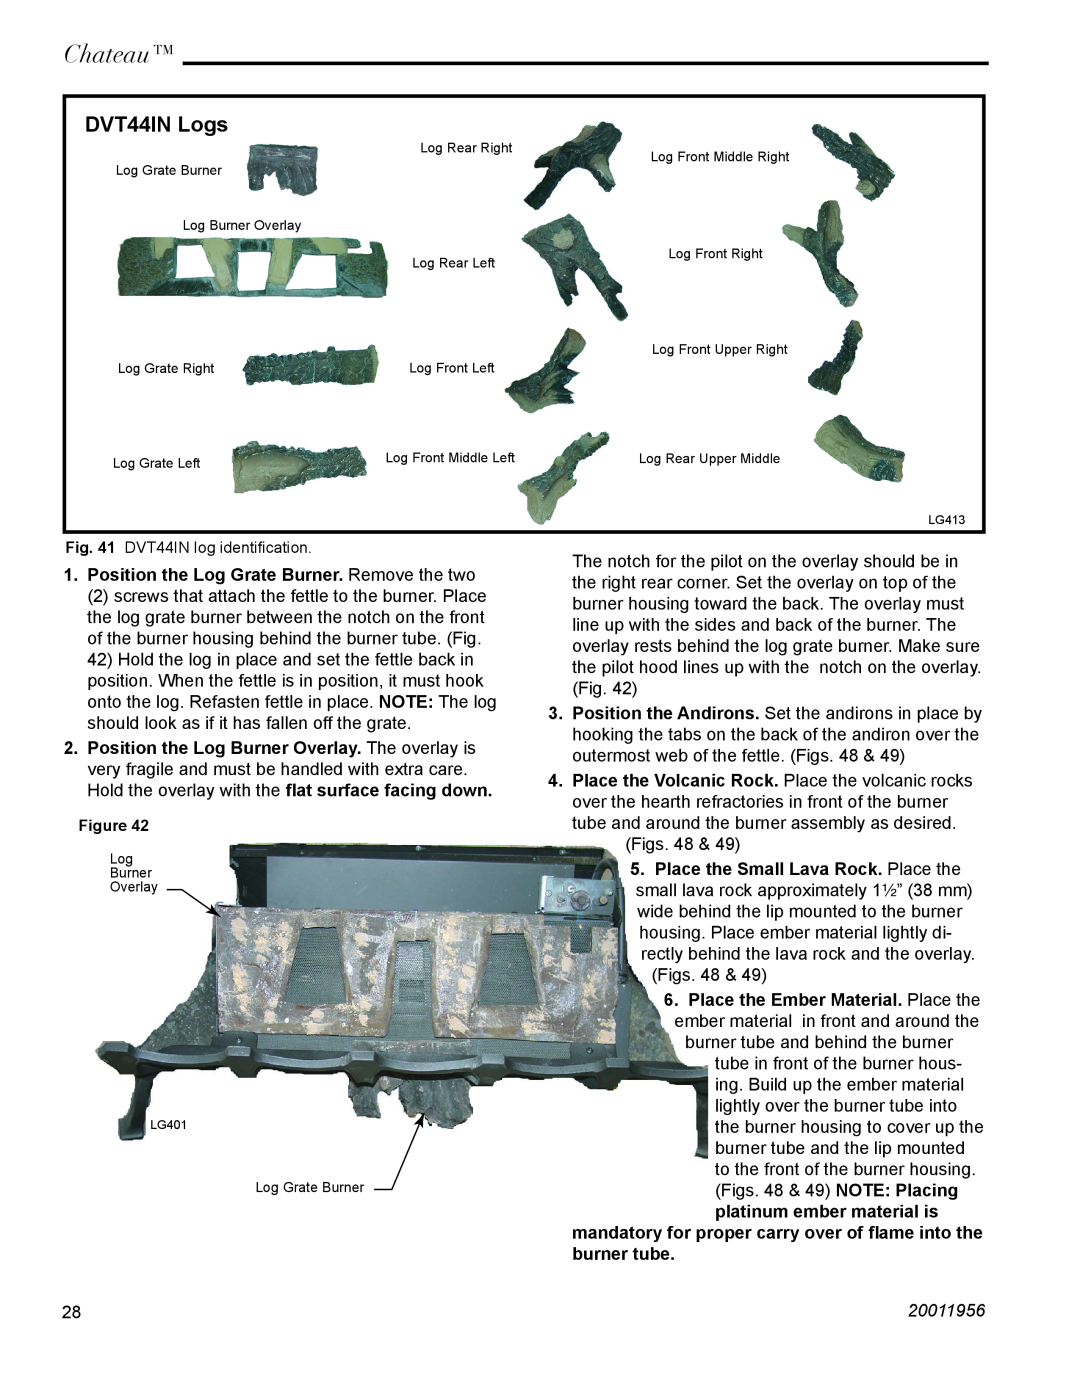 CFM Corporation DVT38IN installation instructions Chateau, DVT44IN Logs, 20011956 